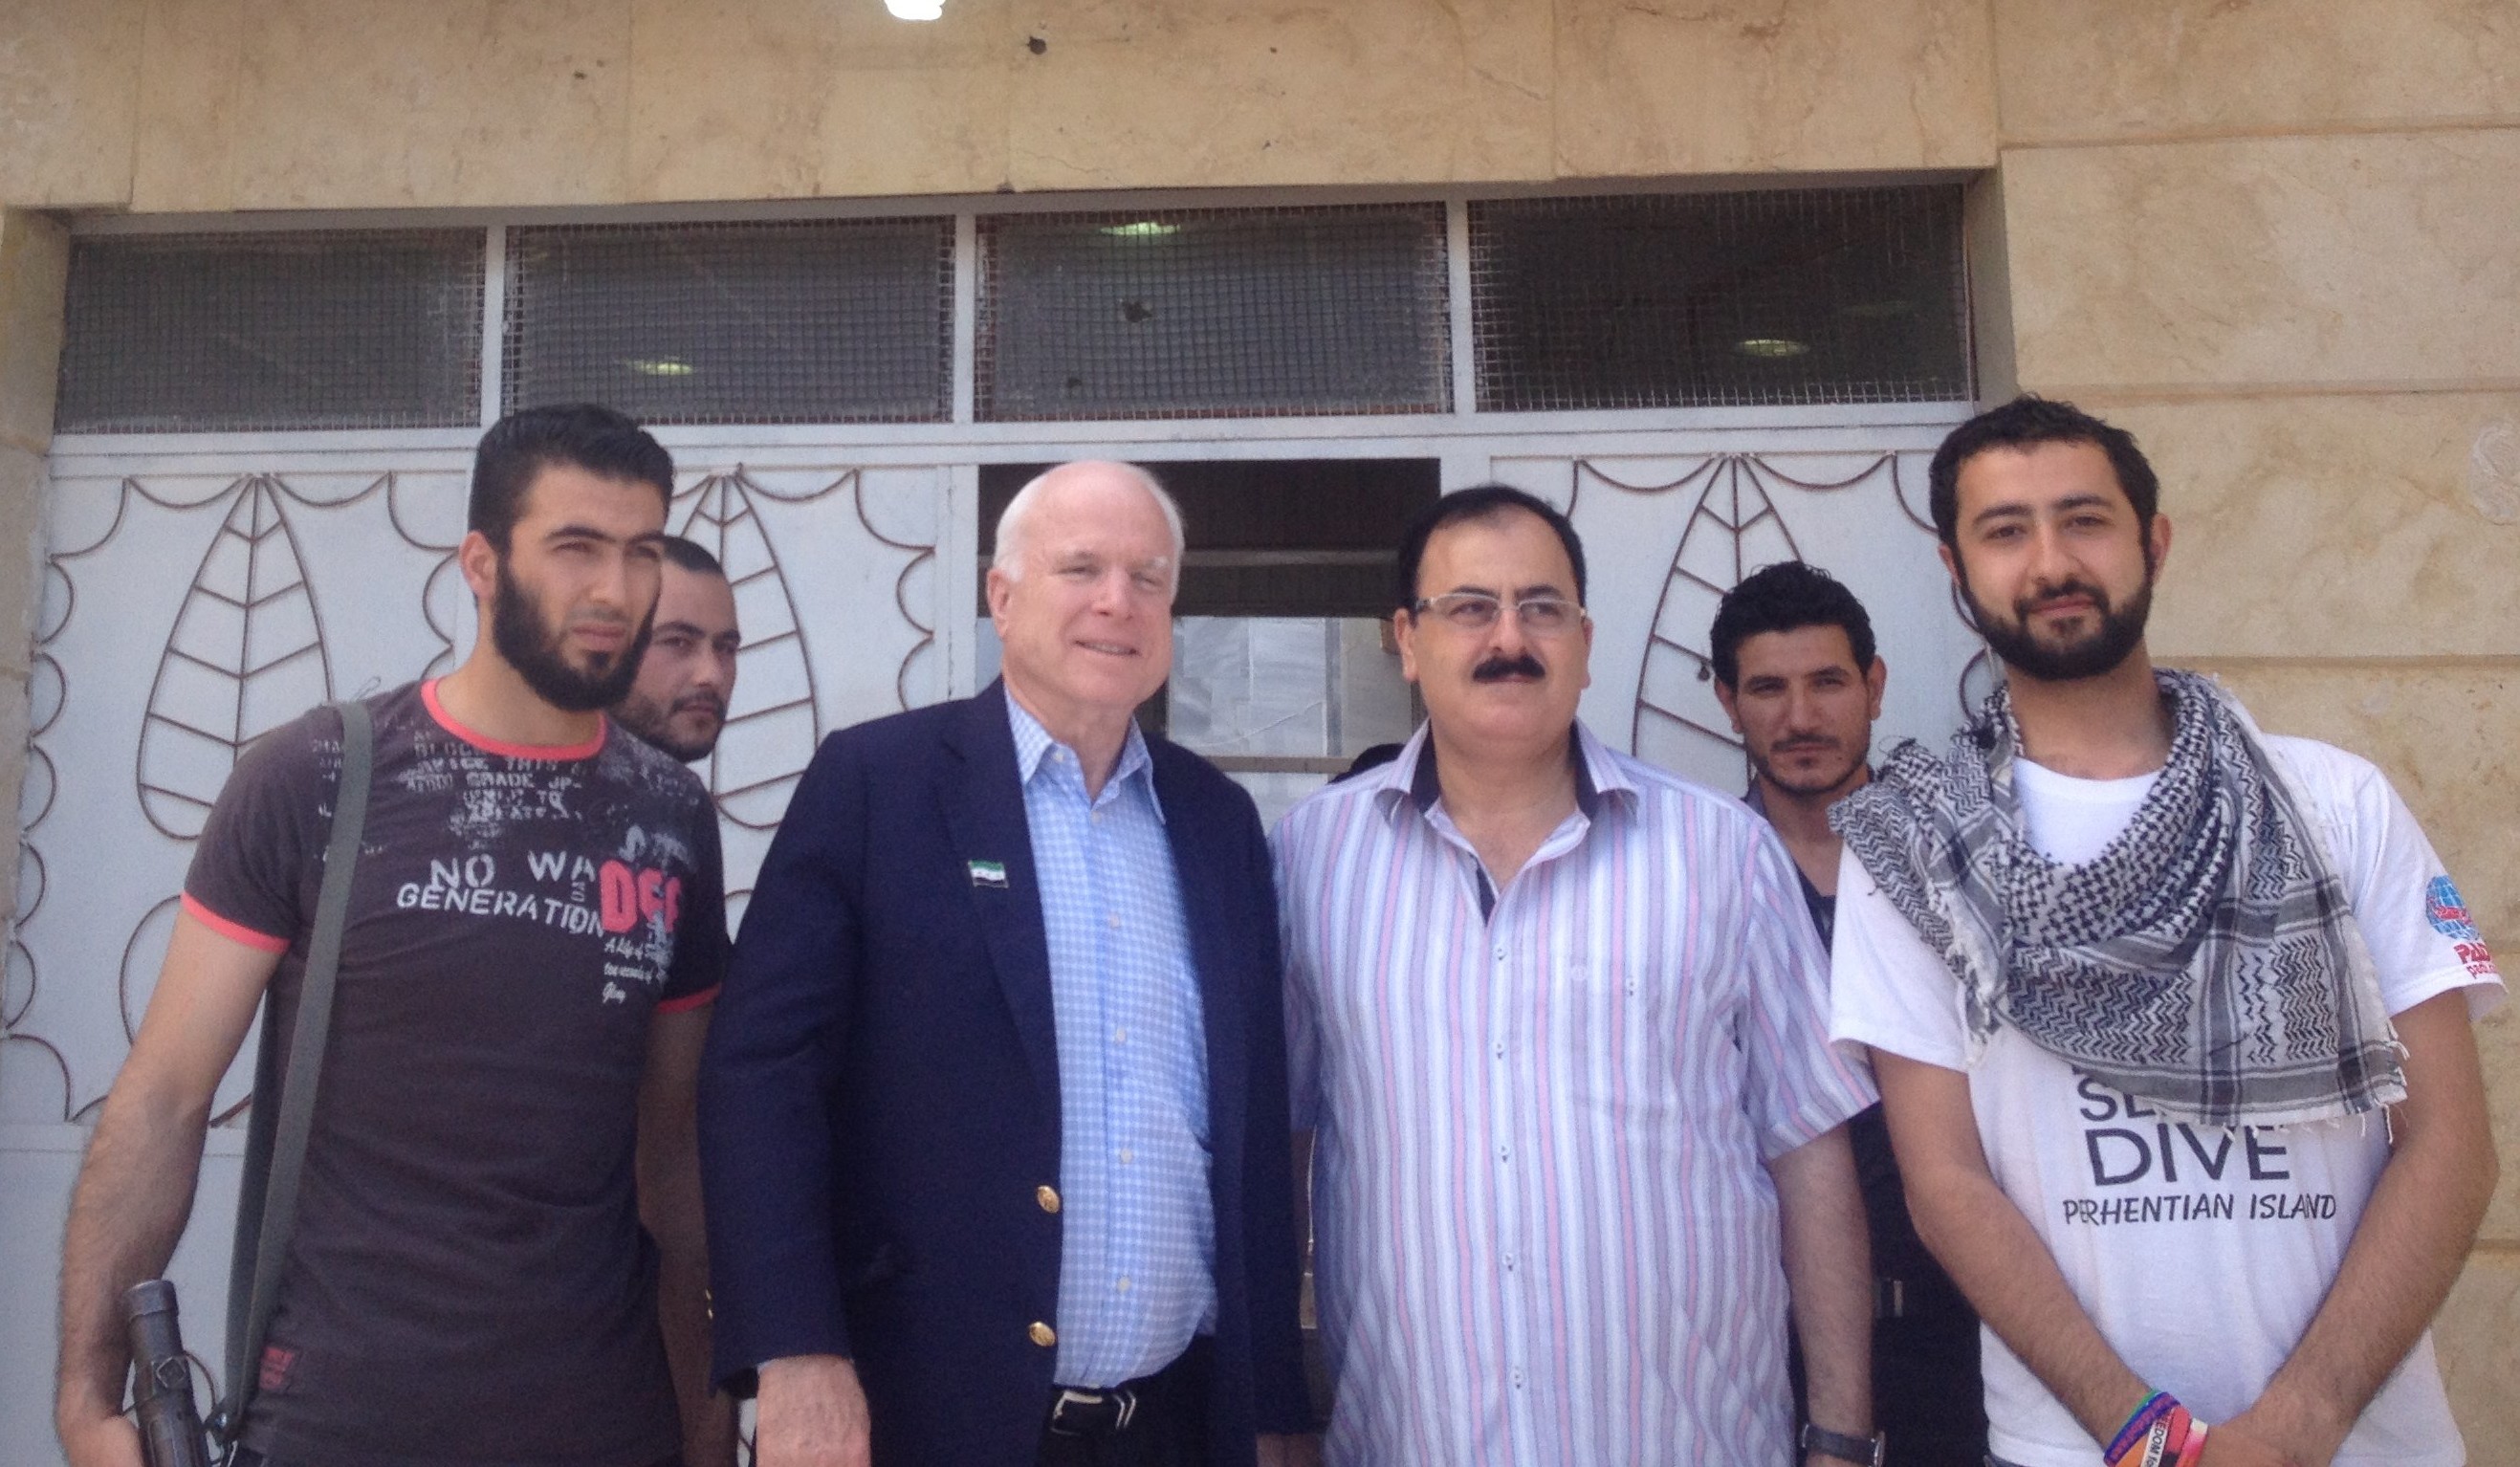  John McCain visited rebels in Syria on Monday, his communications director confirmed to CNN, making the Arizona Republican the highest ranking elected official from the United States to visit the war-torn country since its civil war began over two years ago.